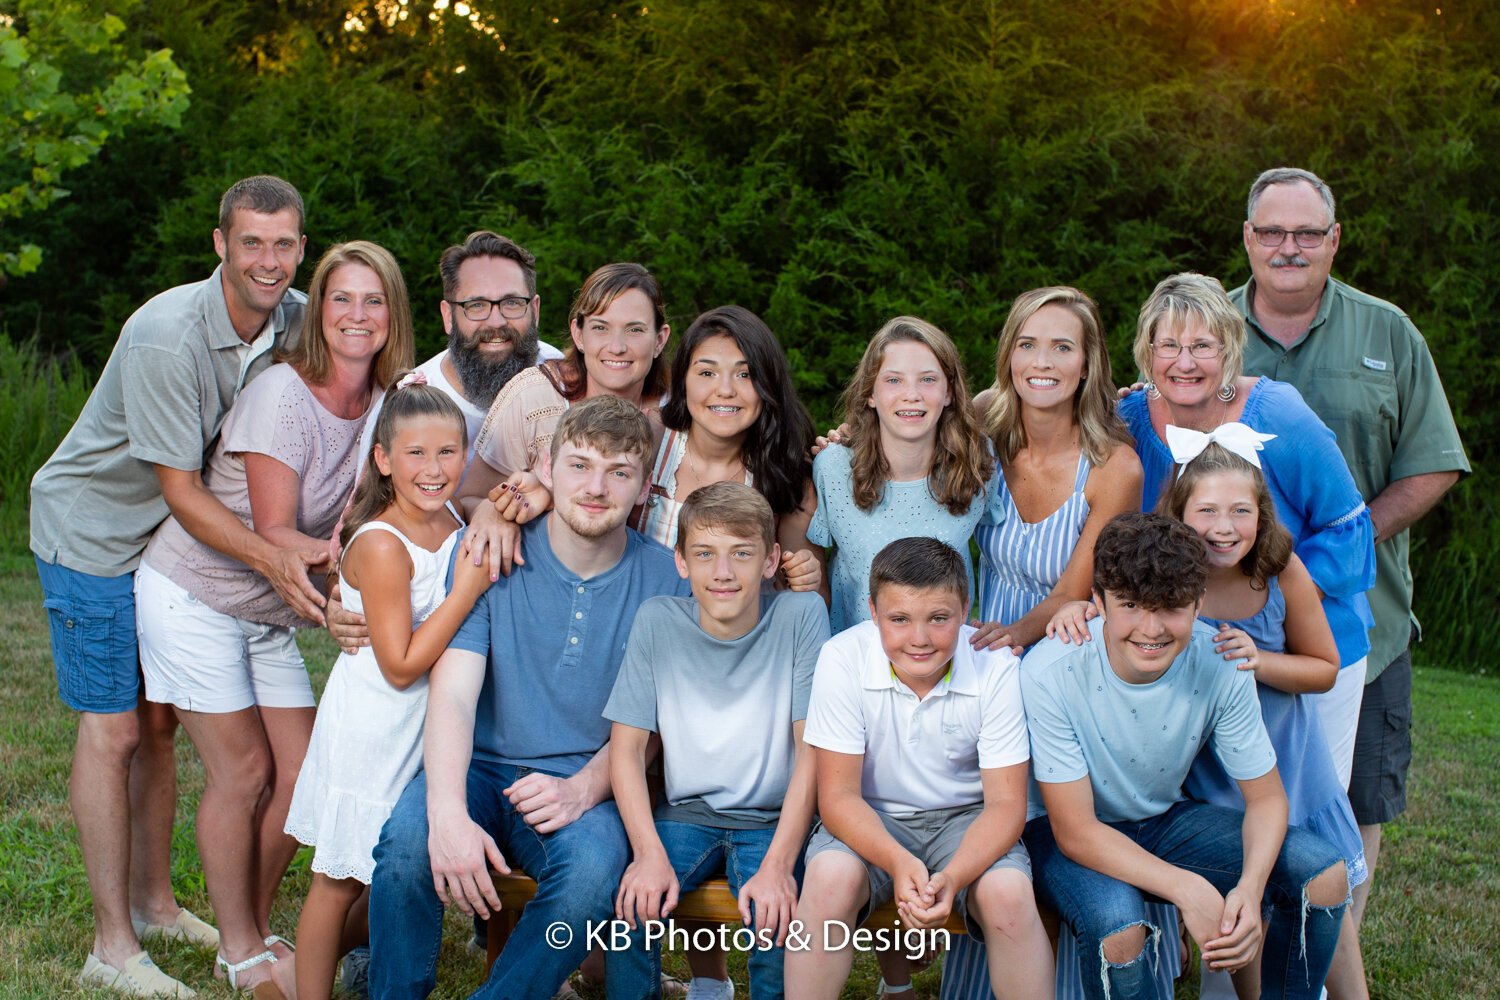 Family-McCleery-Lake-of-the-Ozarks-family-reunion-vacation-photos-Osage-Beach-suprise-engagement-KB-Photos-and-Design-photography-10.JPG